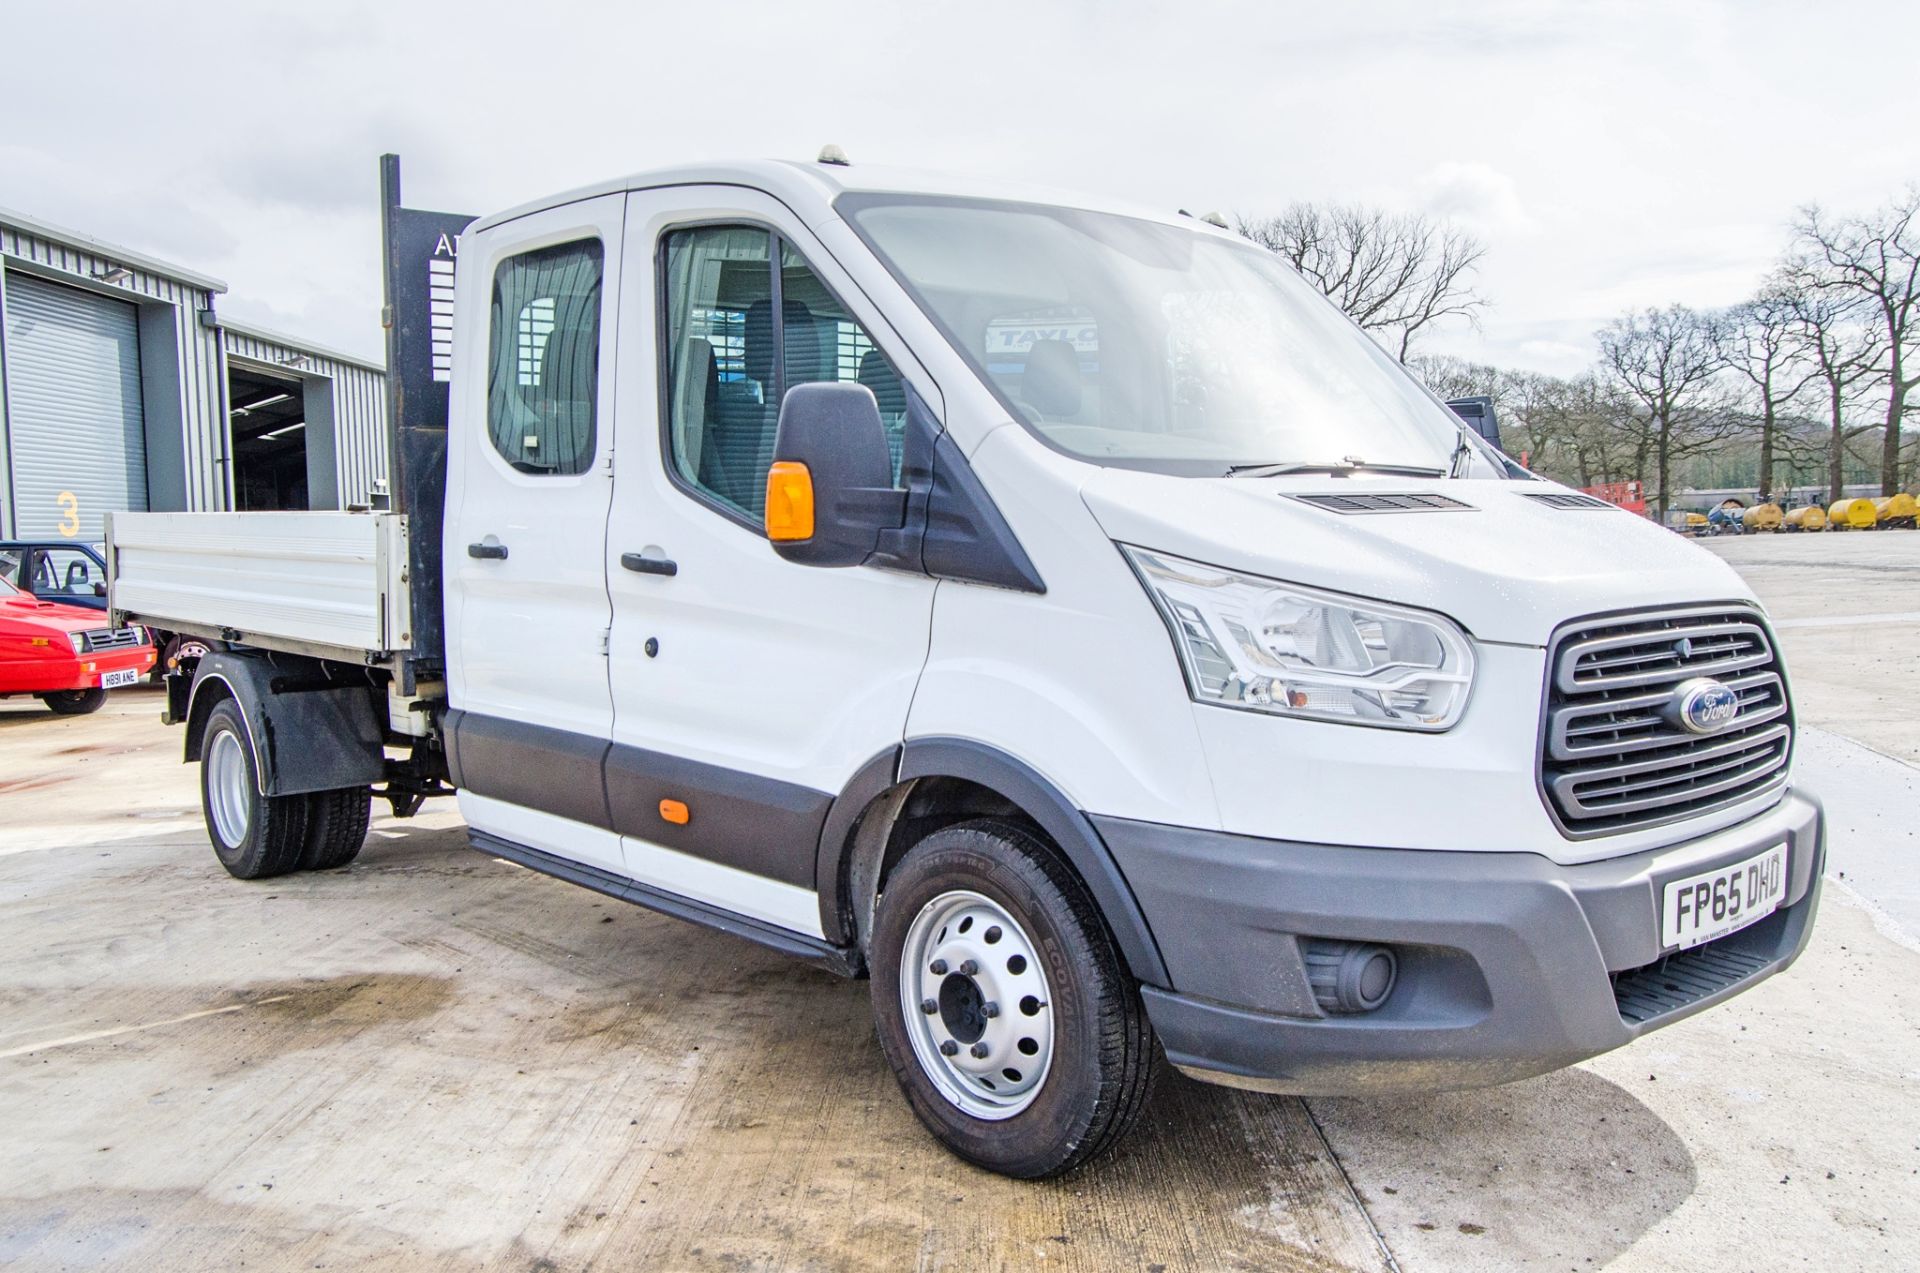 Ford Transit 350 2198cc 6 speed manual crew cab tipper  Registration Number: FP65 DHD Date of - Image 2 of 35